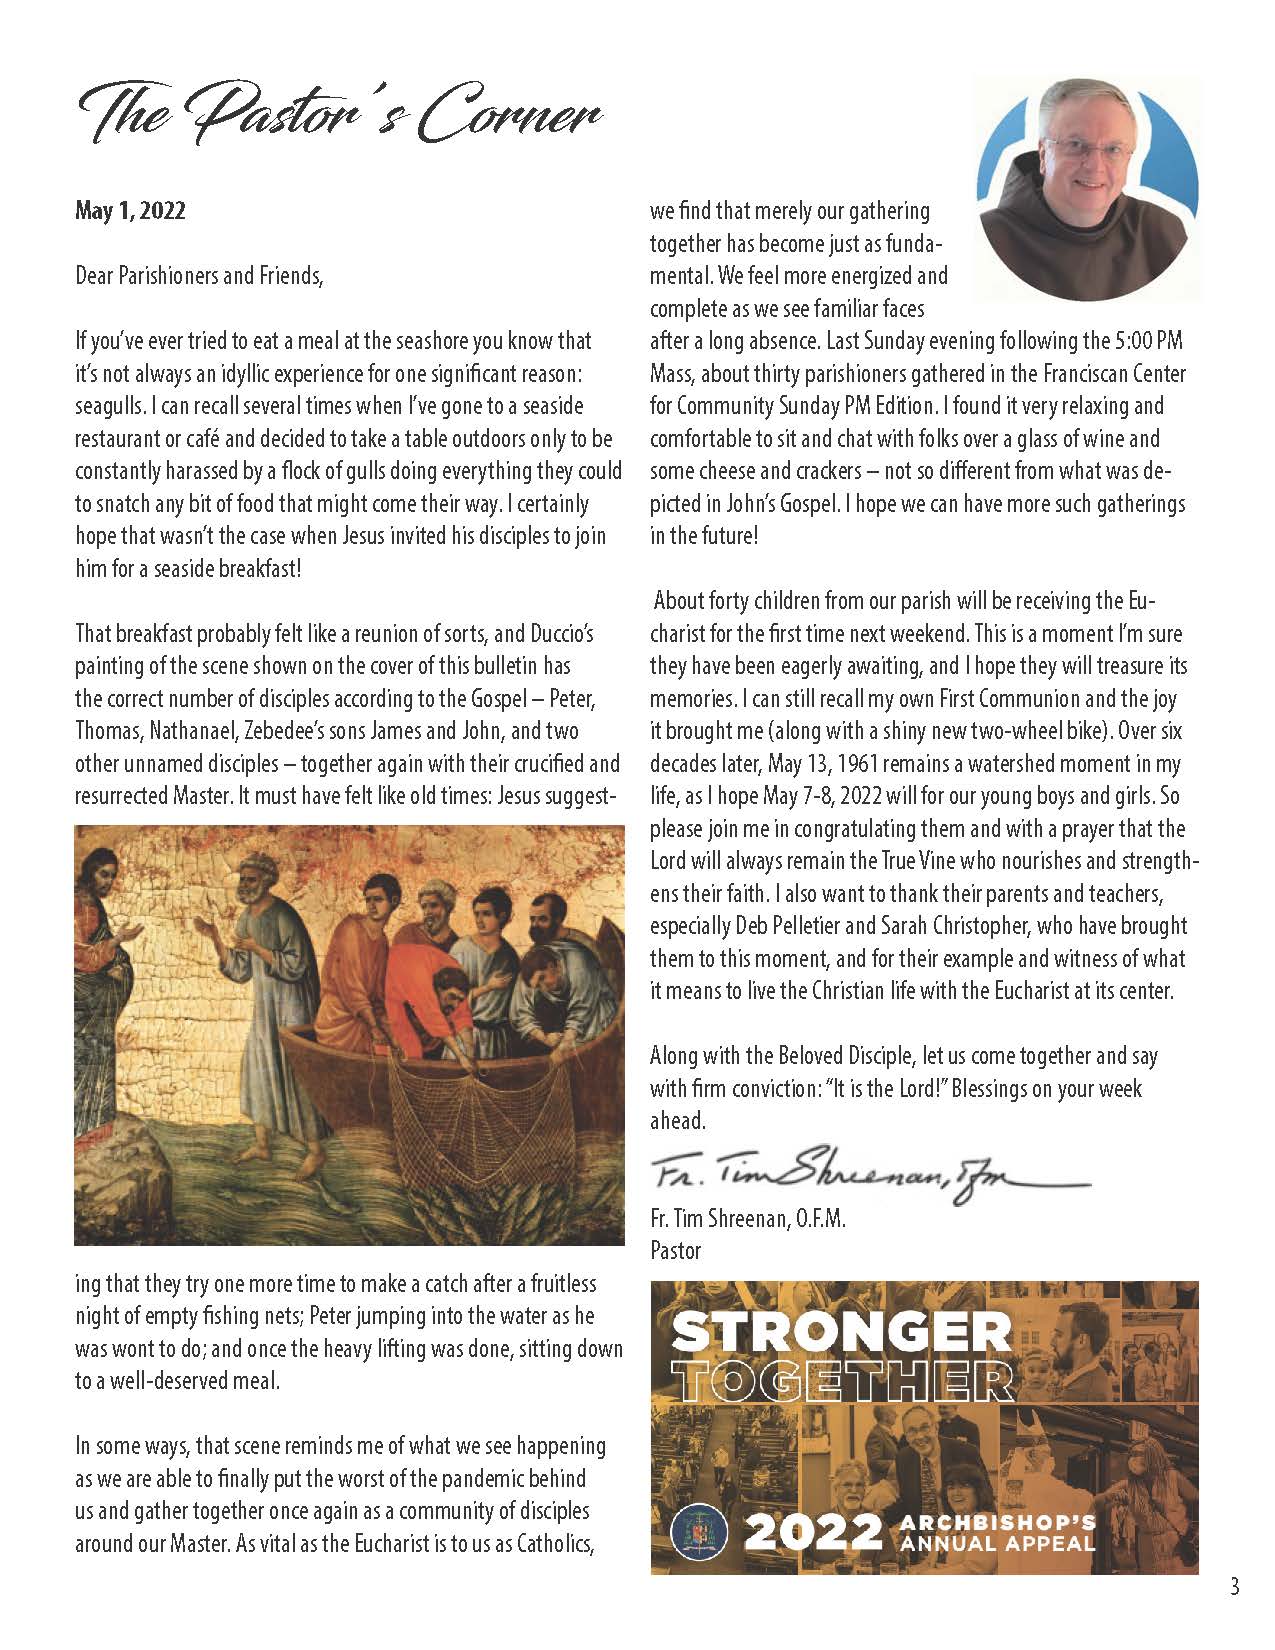 Father Tim's letter 5-1-22